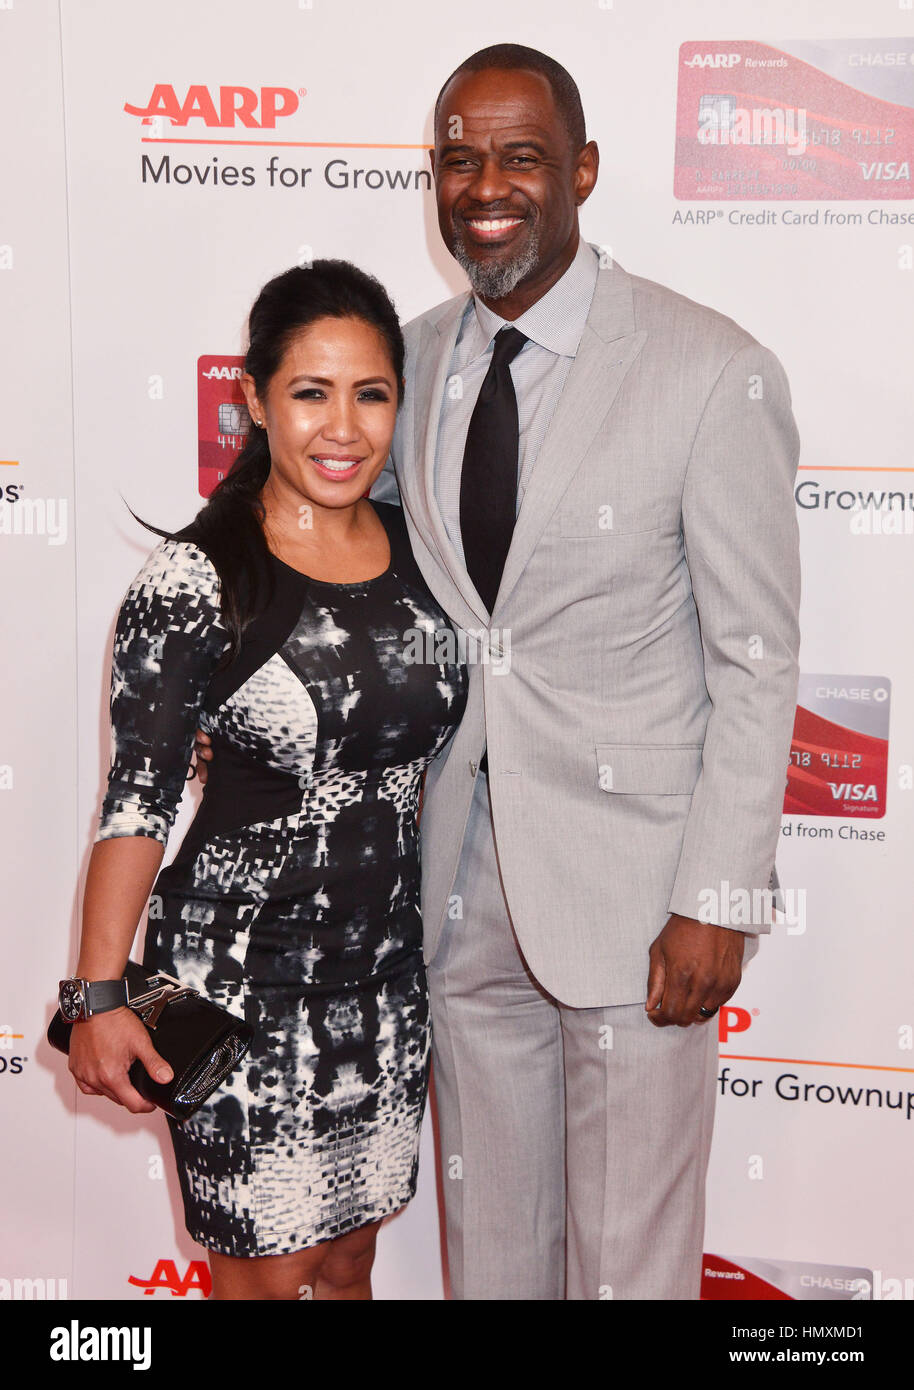 brian mcknight wife age difference